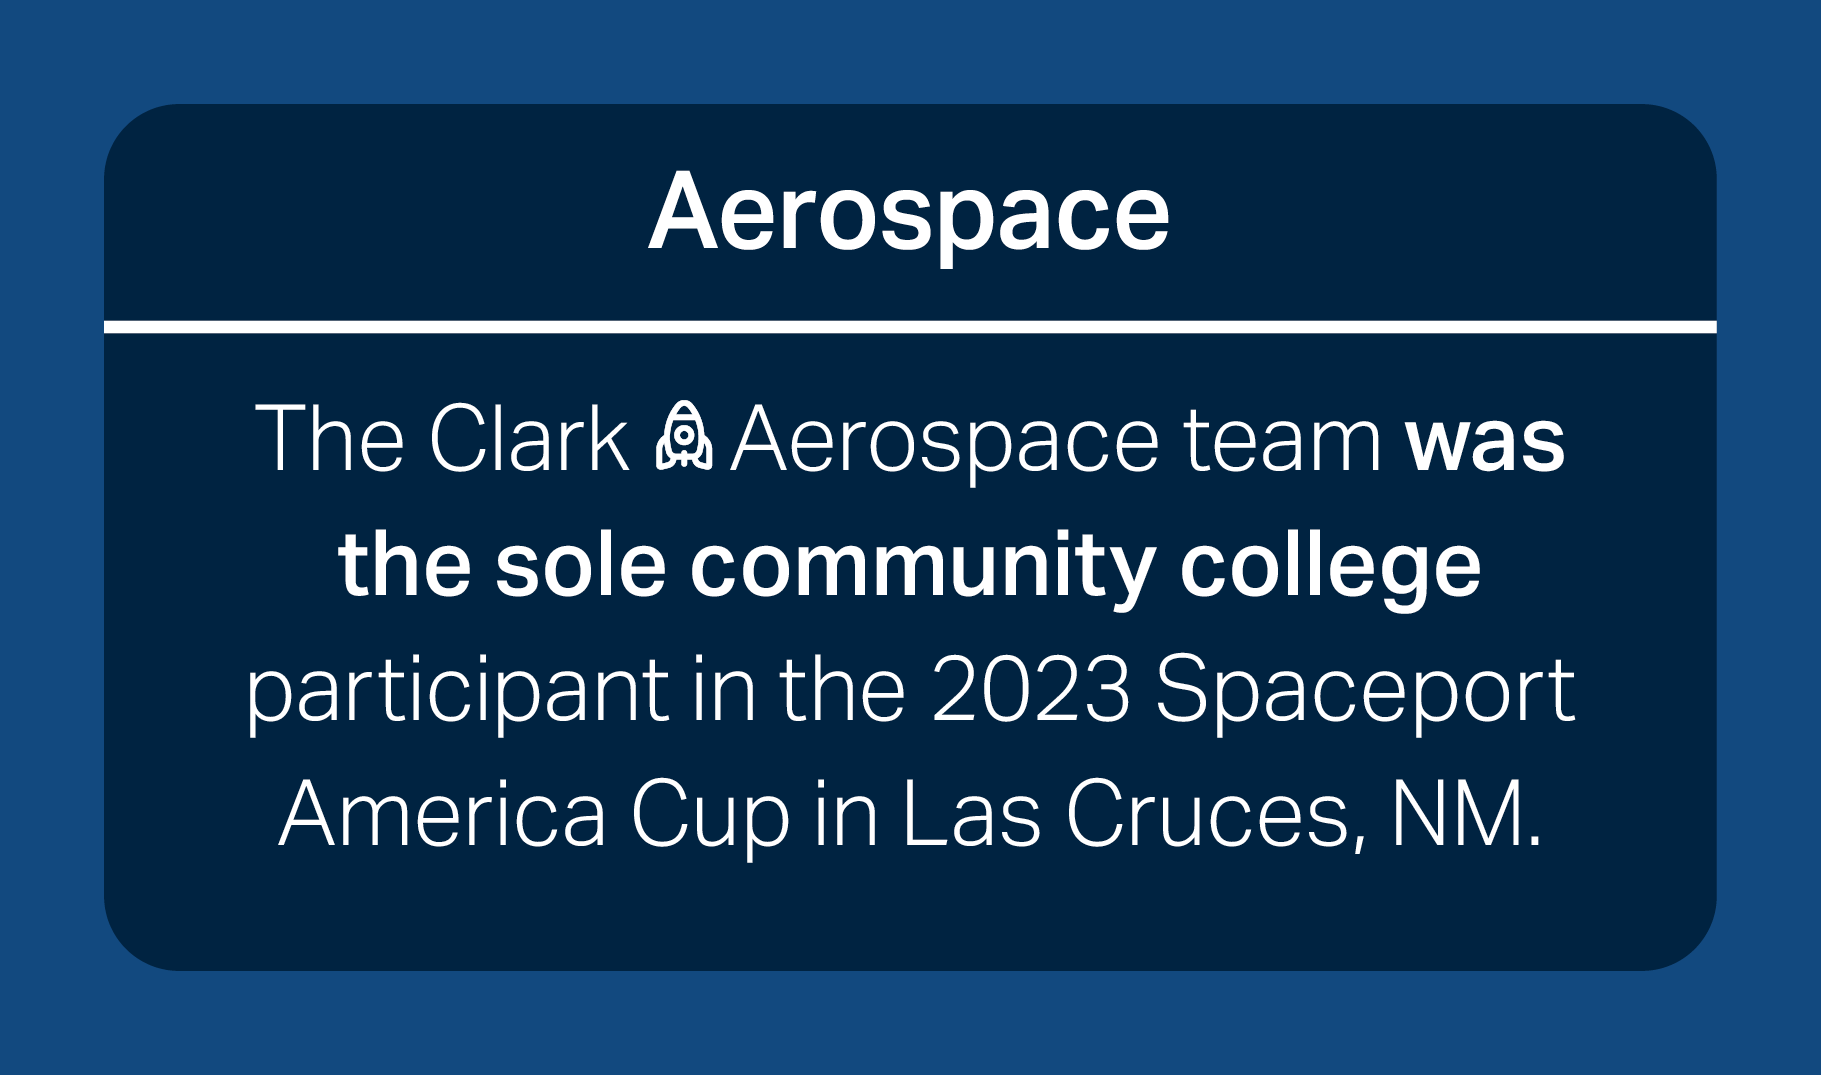 Aerospace. The Clark aerospace team was the sole Community College participant in the 2023 spaceport America cup in Las Cruces, NM